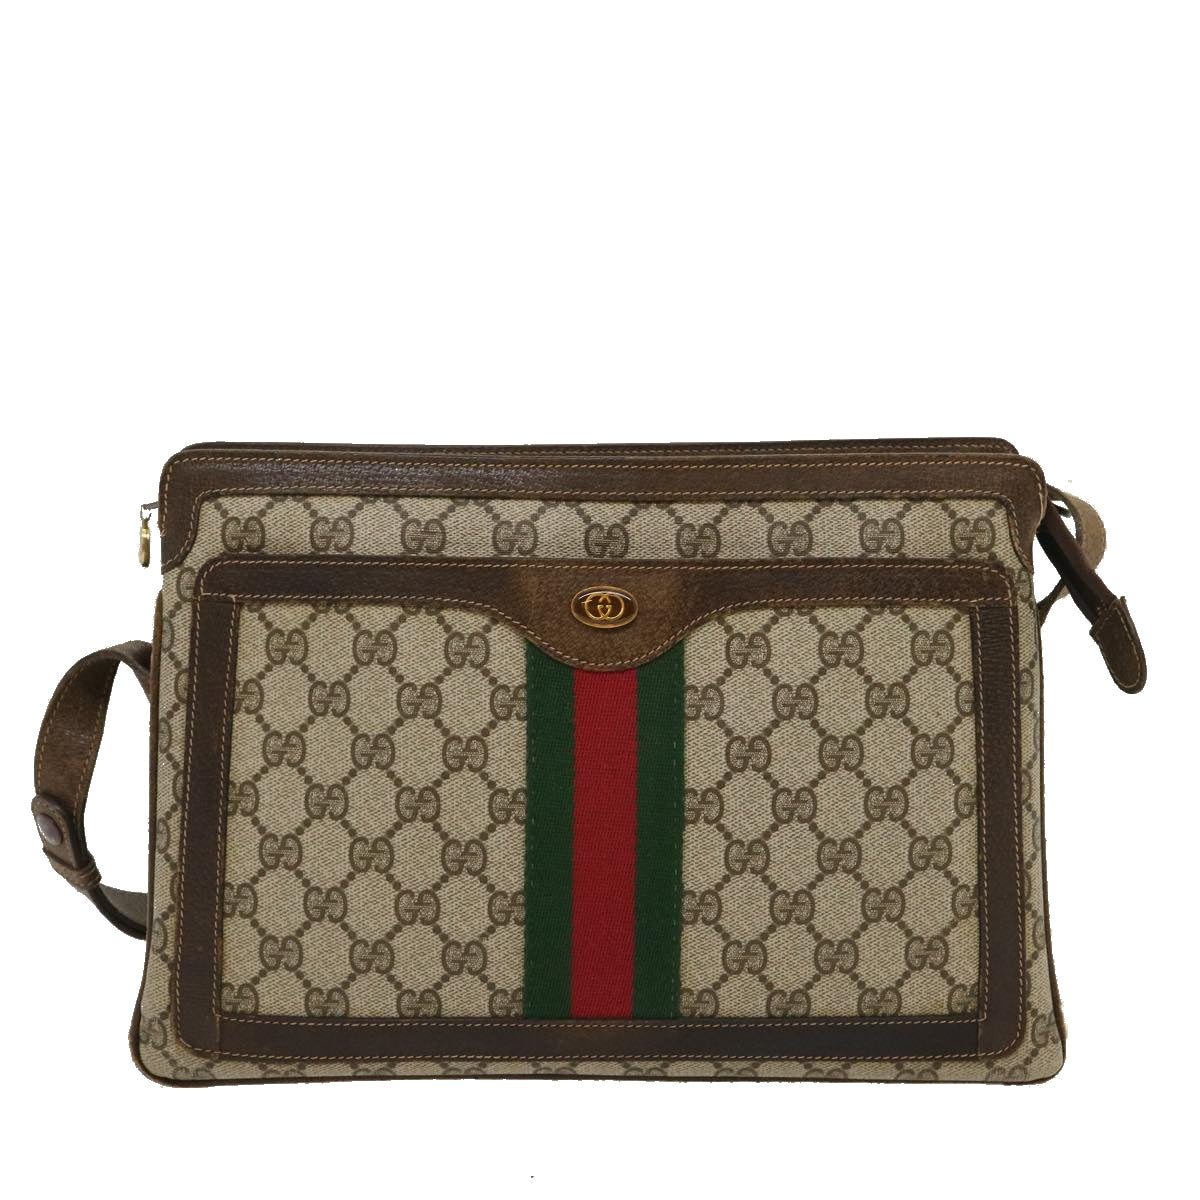 GUCCI Web Sherry Line GG Canvas Shoulder Bag Beige Red Green Auth bs1024